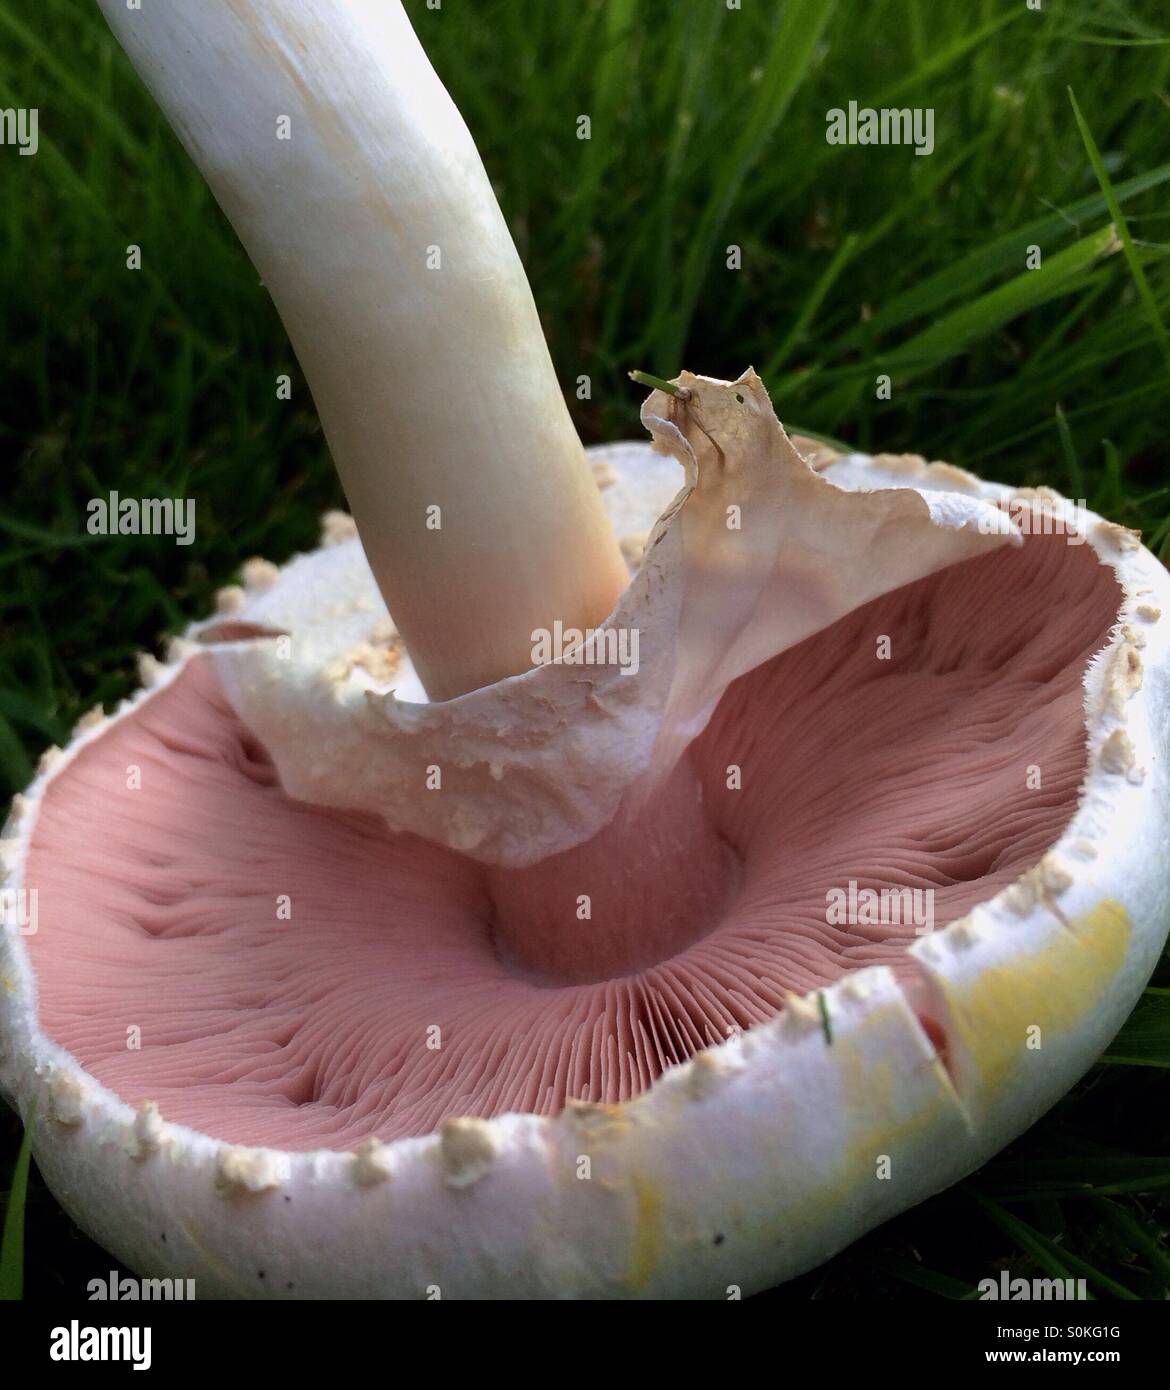 Poisonous Fungi the Agaricus Xanthodermus, the Yellow Stainer, can cause serious stomach upsets and so should not be eaten. The Yellow Stainer occurs throughout Britain and Ireland. Stock Photo